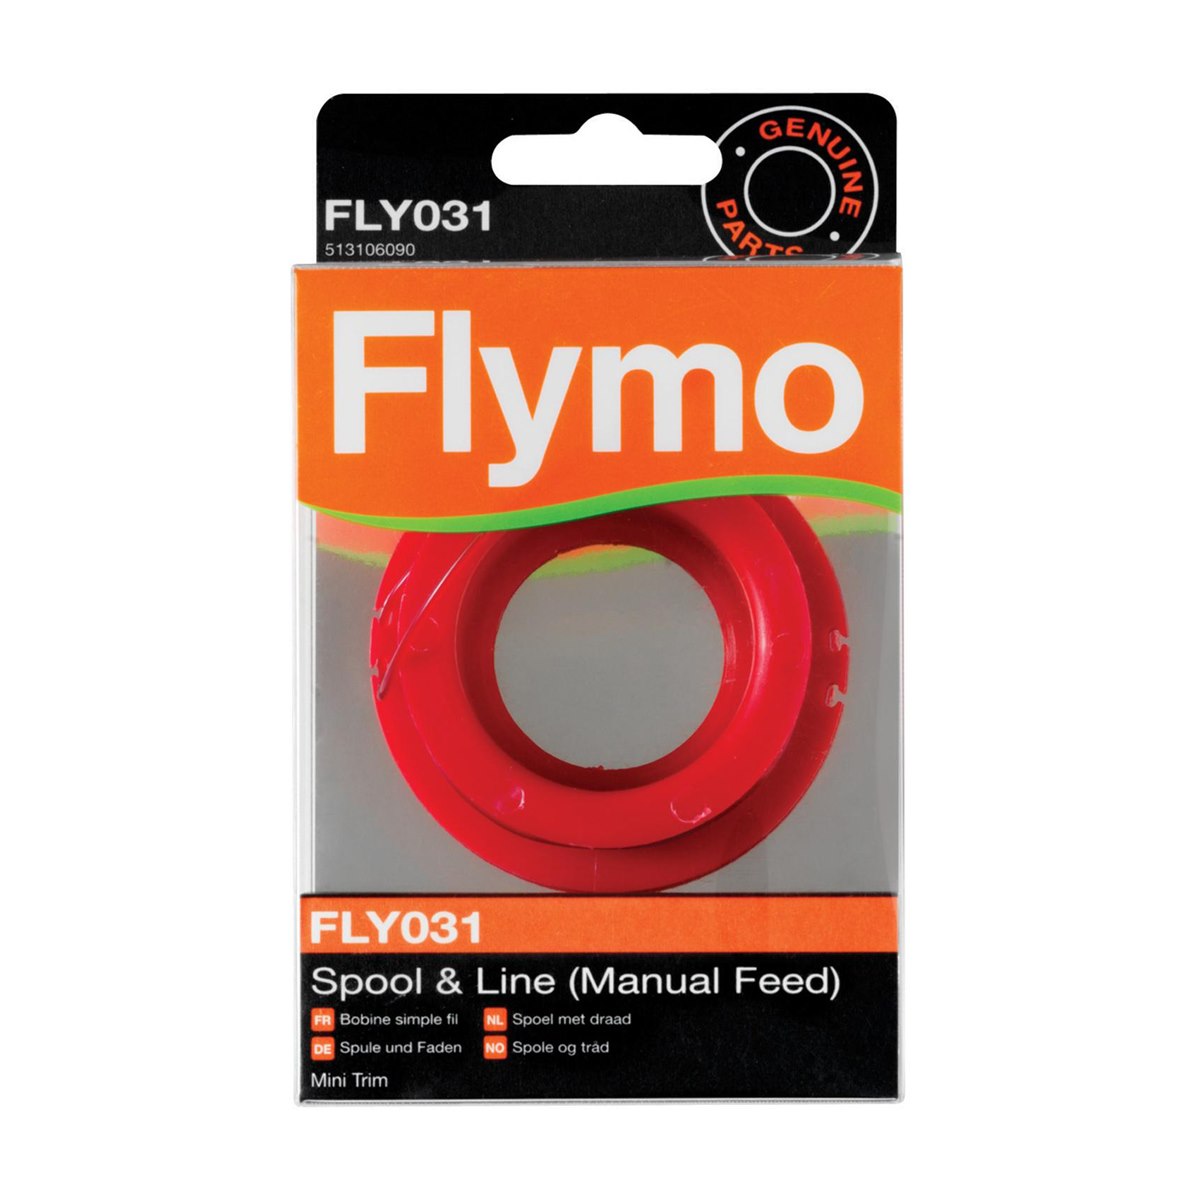 FLY031 Genuine Flymo Spool and Line (Manual Feed)